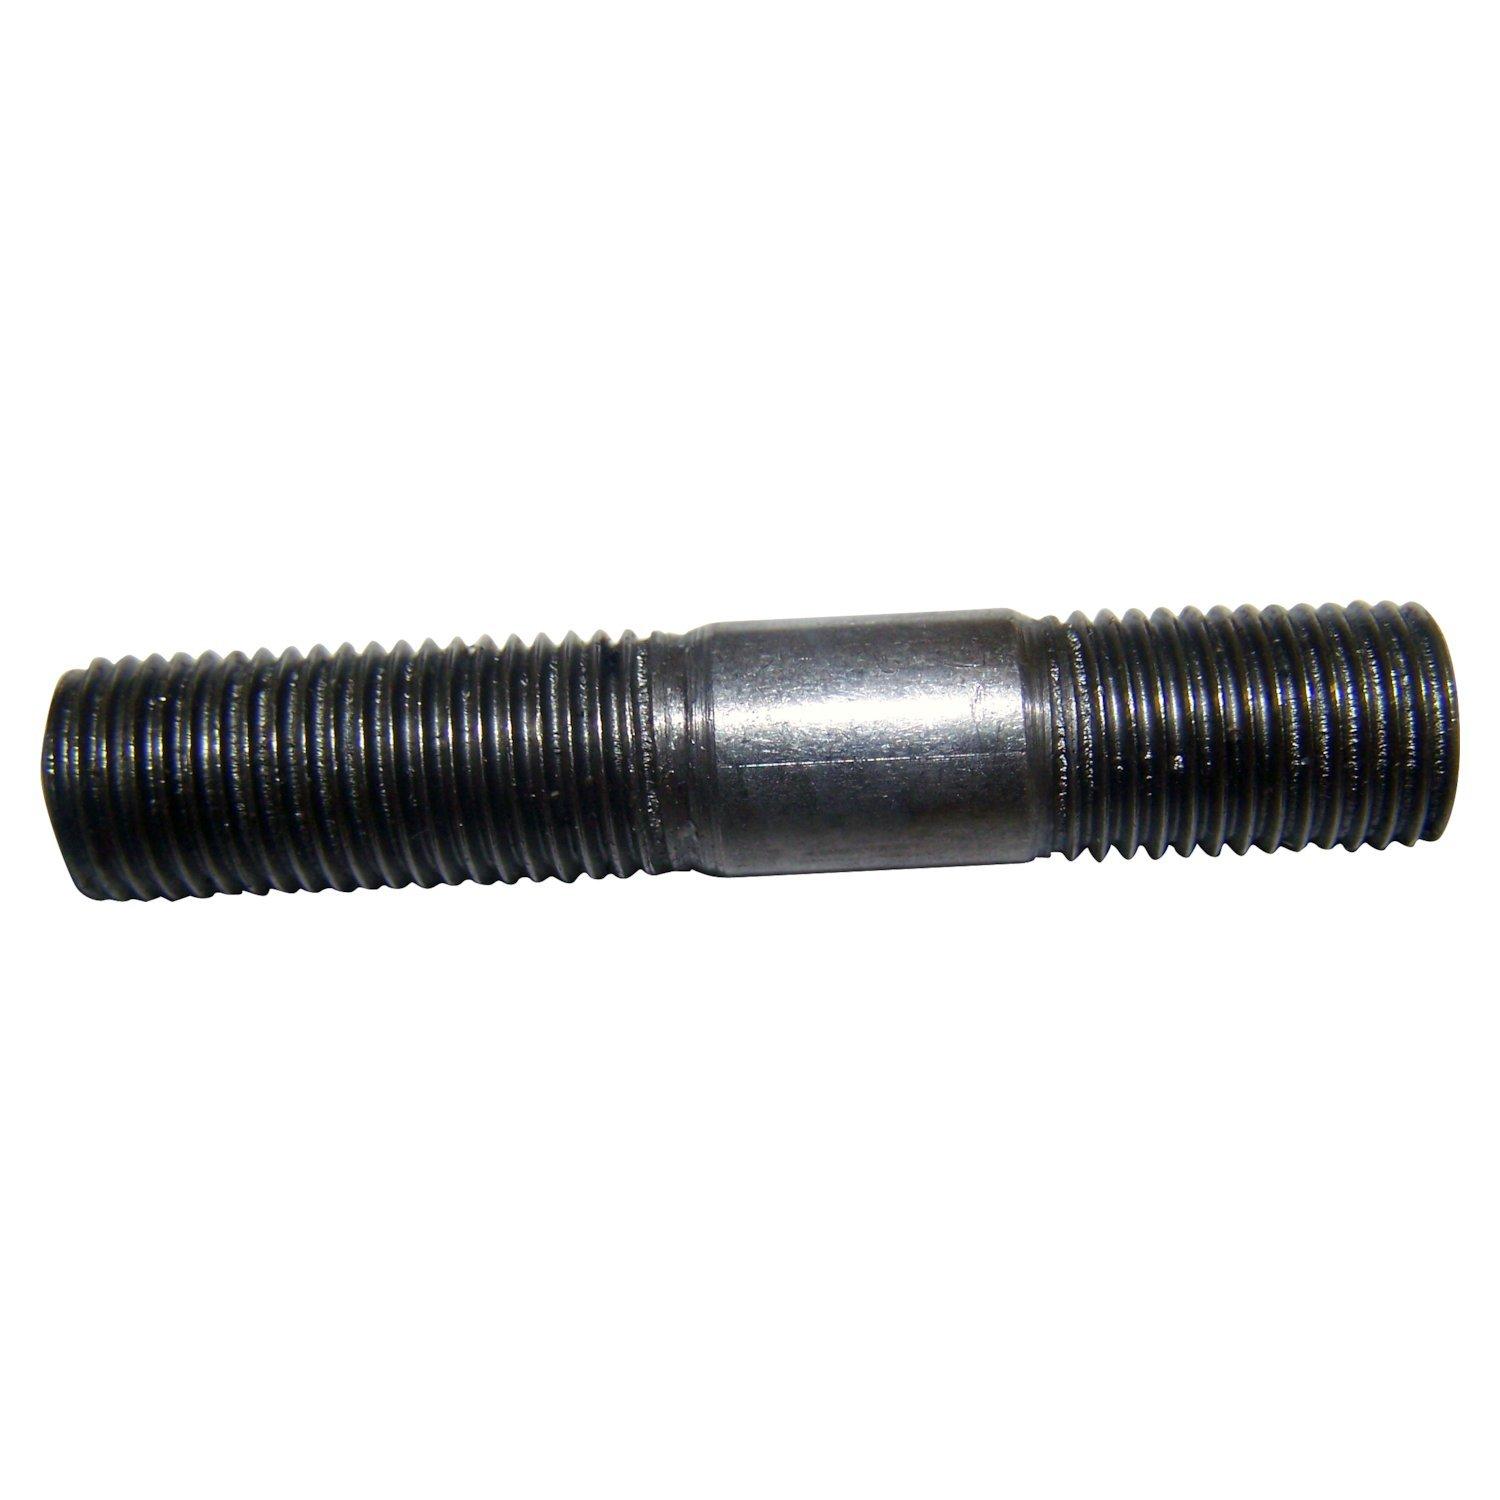 Crown Automotive Jeep Replacement J0643754 Steering King Pin Cap Bolt